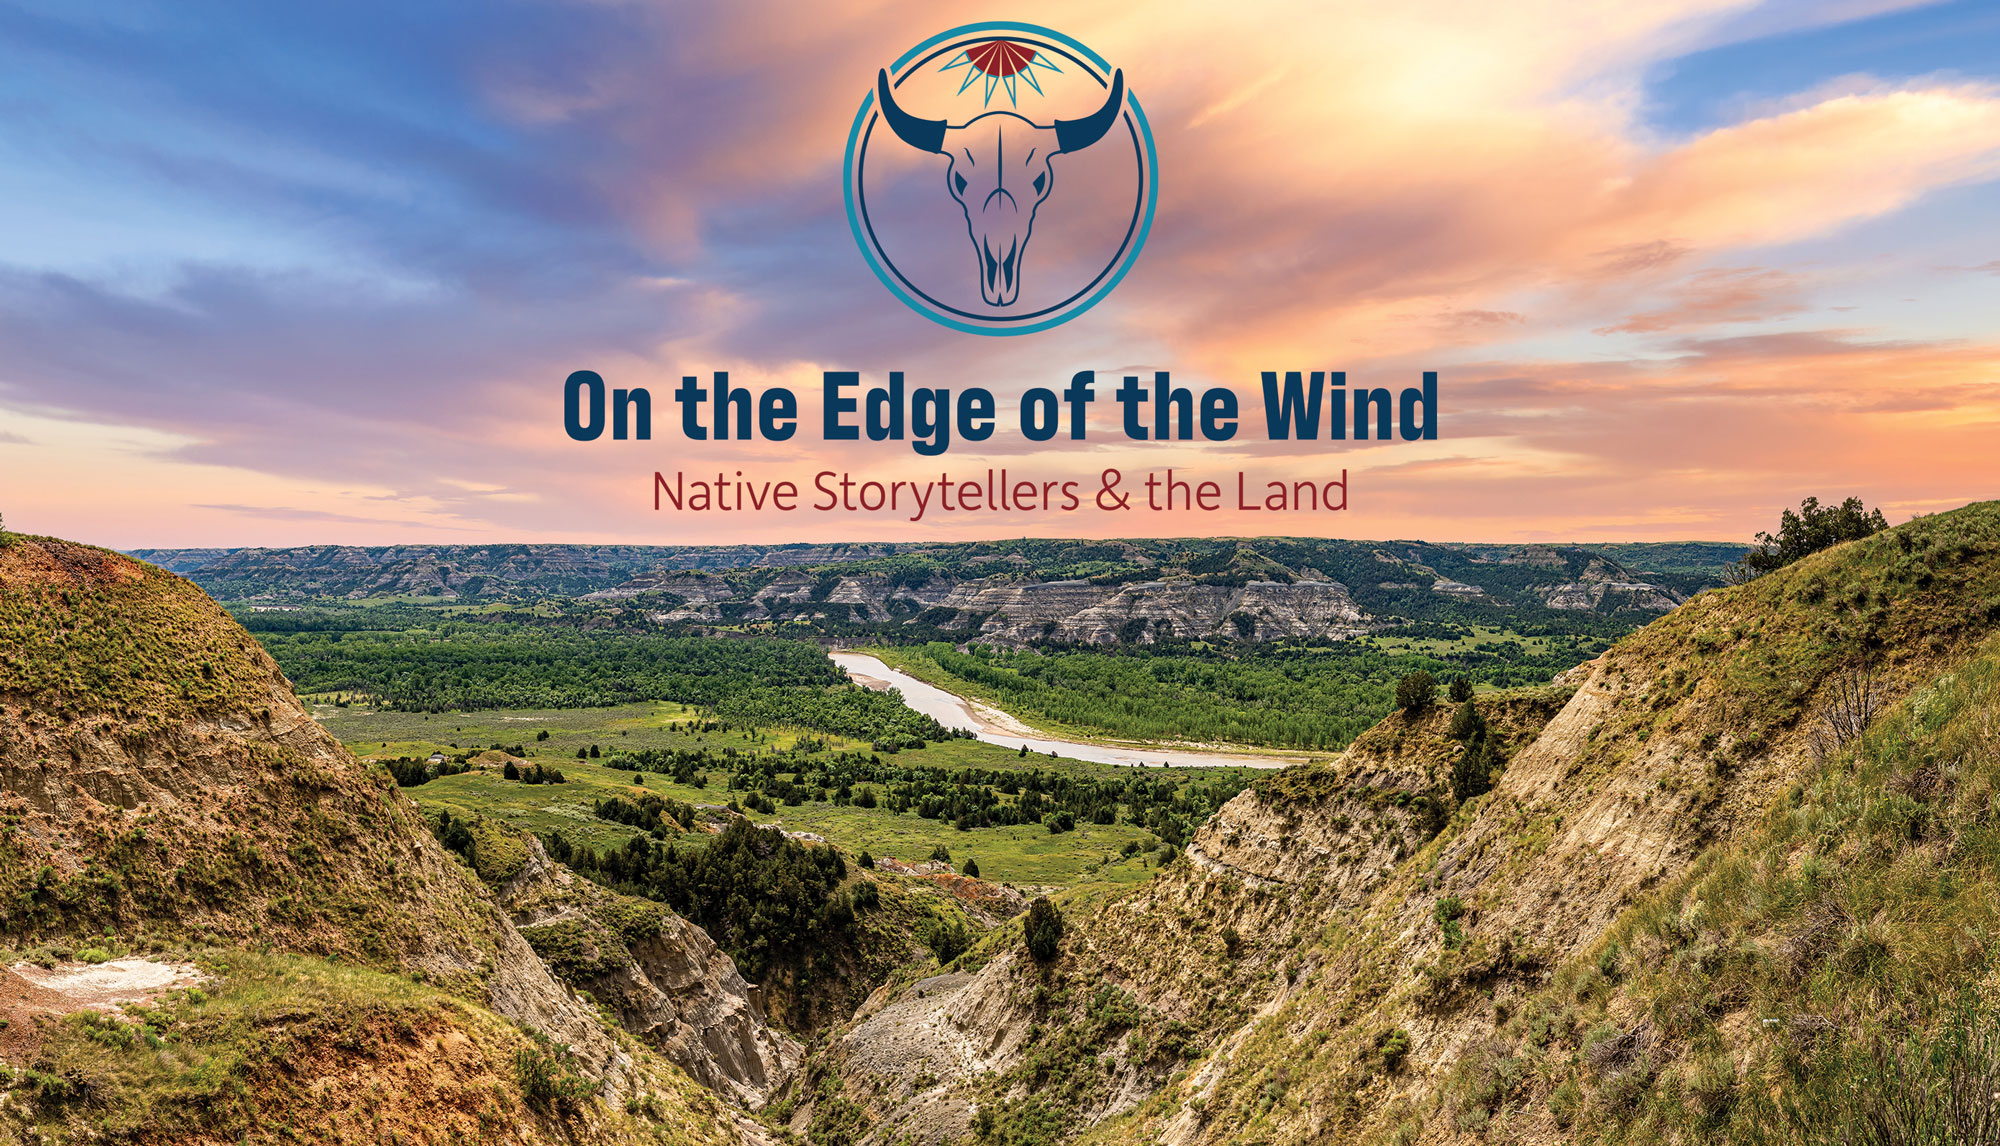 In the background is a landscape photo with a colorful blue, pink, red, and purple sunset and buttes with a river down the middle. There is also a logo with a bison skull is inside a double outlined circle with diamond feathers at the top of the circle making them look like part of a sun. Under the icon it says On the Edge of the Wind: Native Storytellers & the Land.